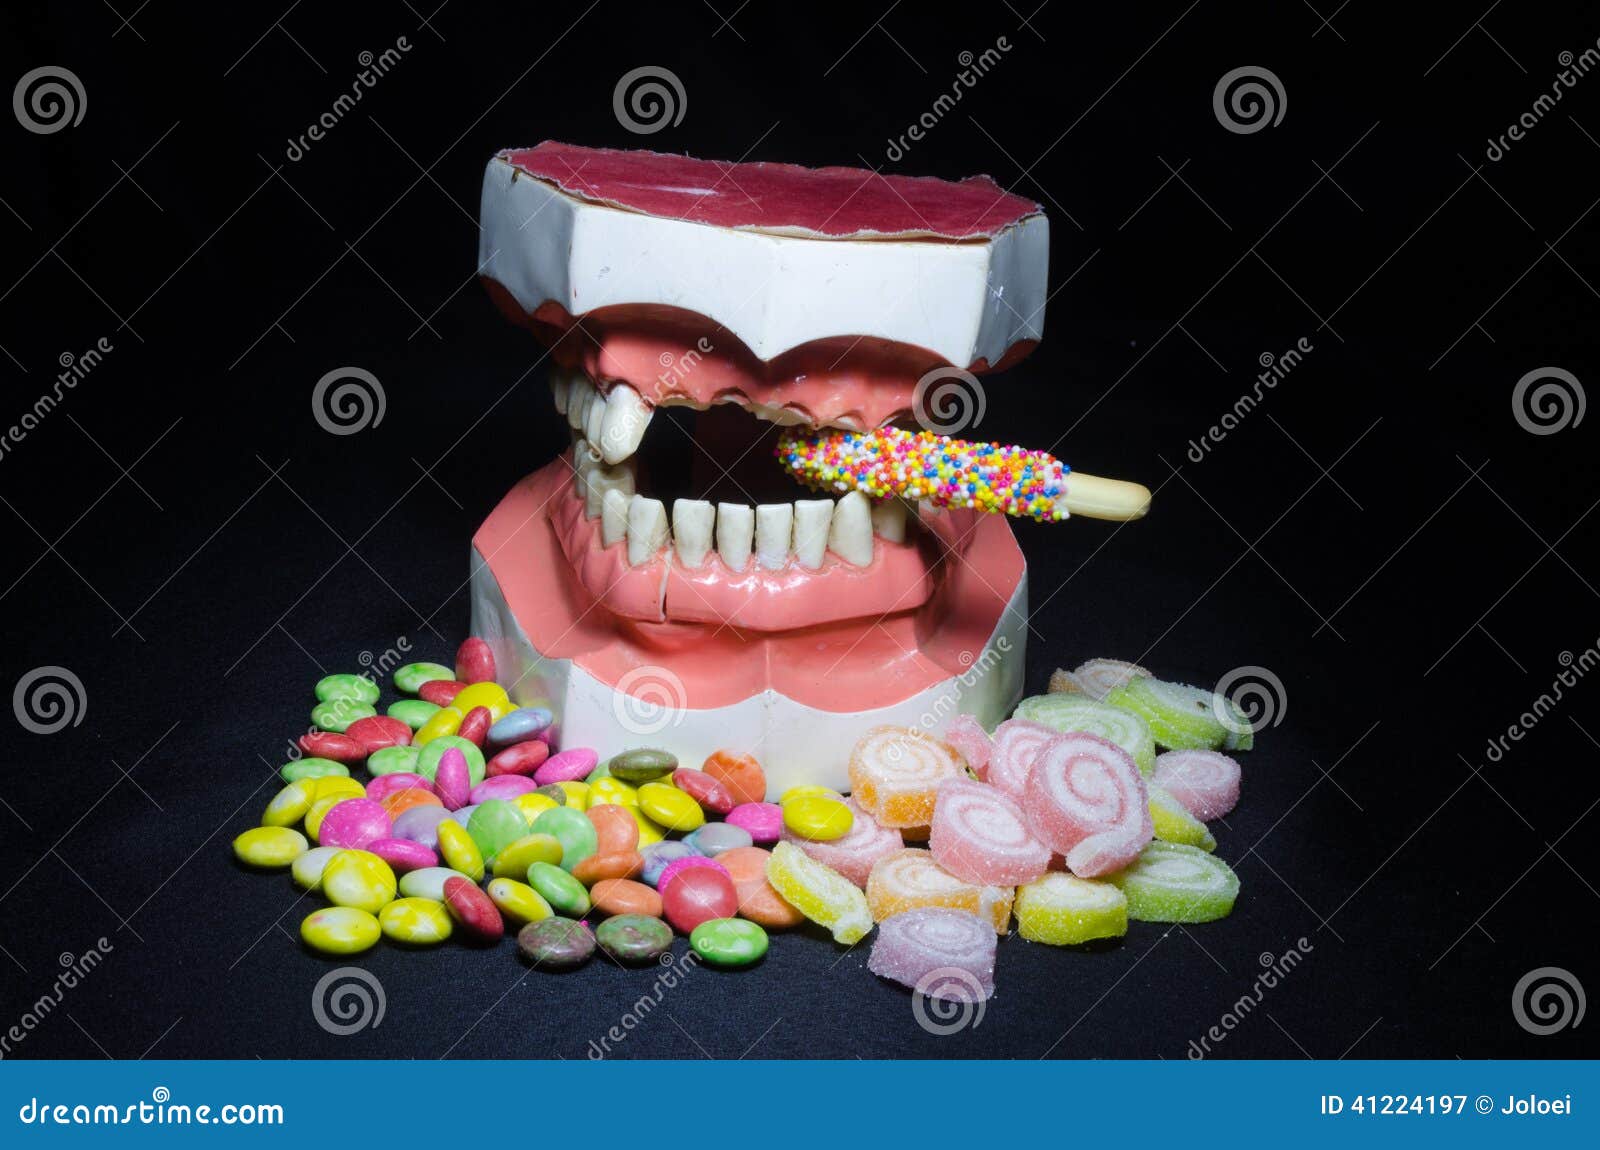 Pile Of Candy Whit Broken Tooth Stock Image Image Of Care Medicine